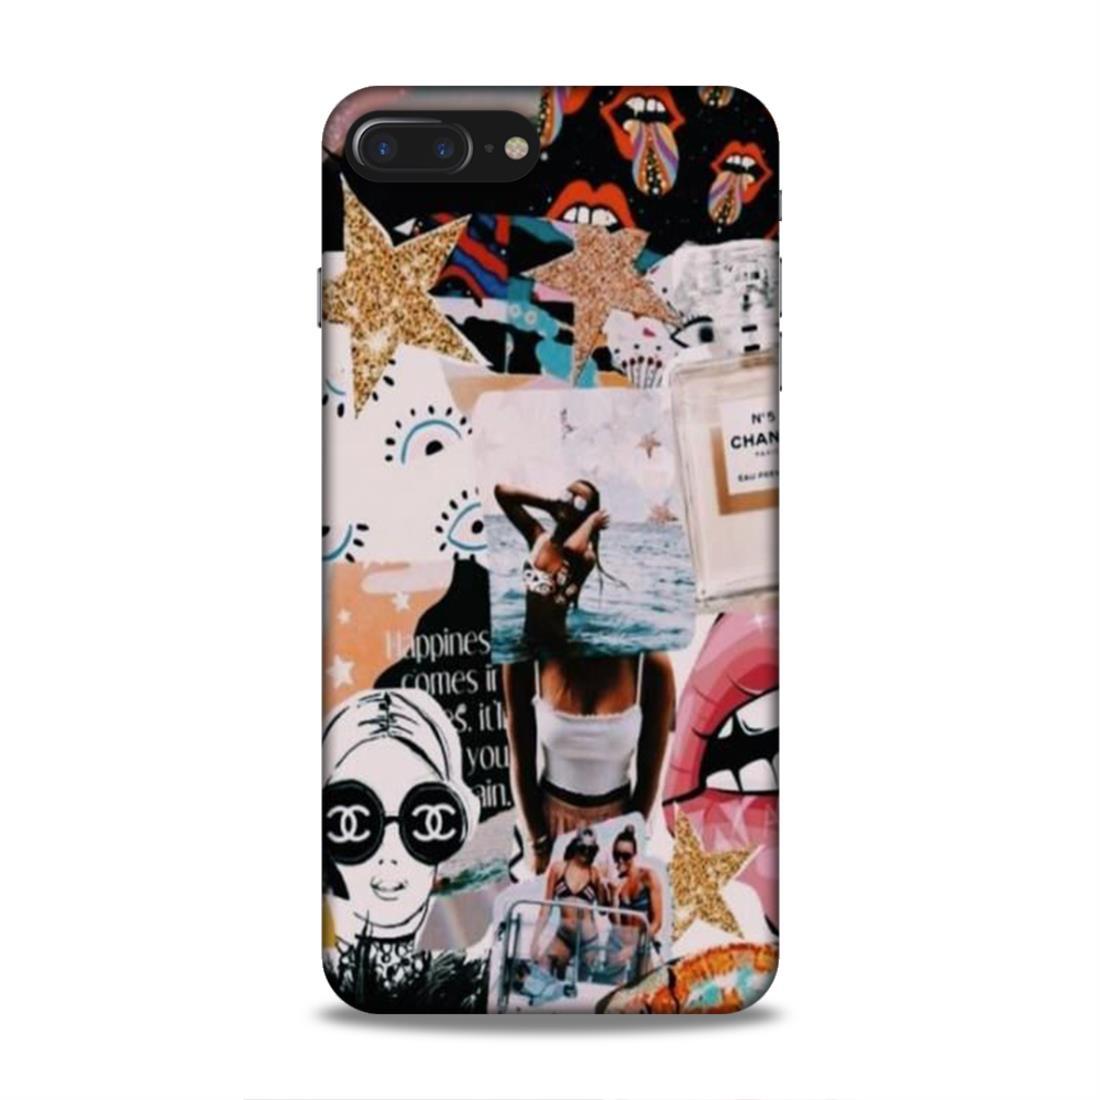 Happy Girl iPhone 8 Plus Mobile Case Cover